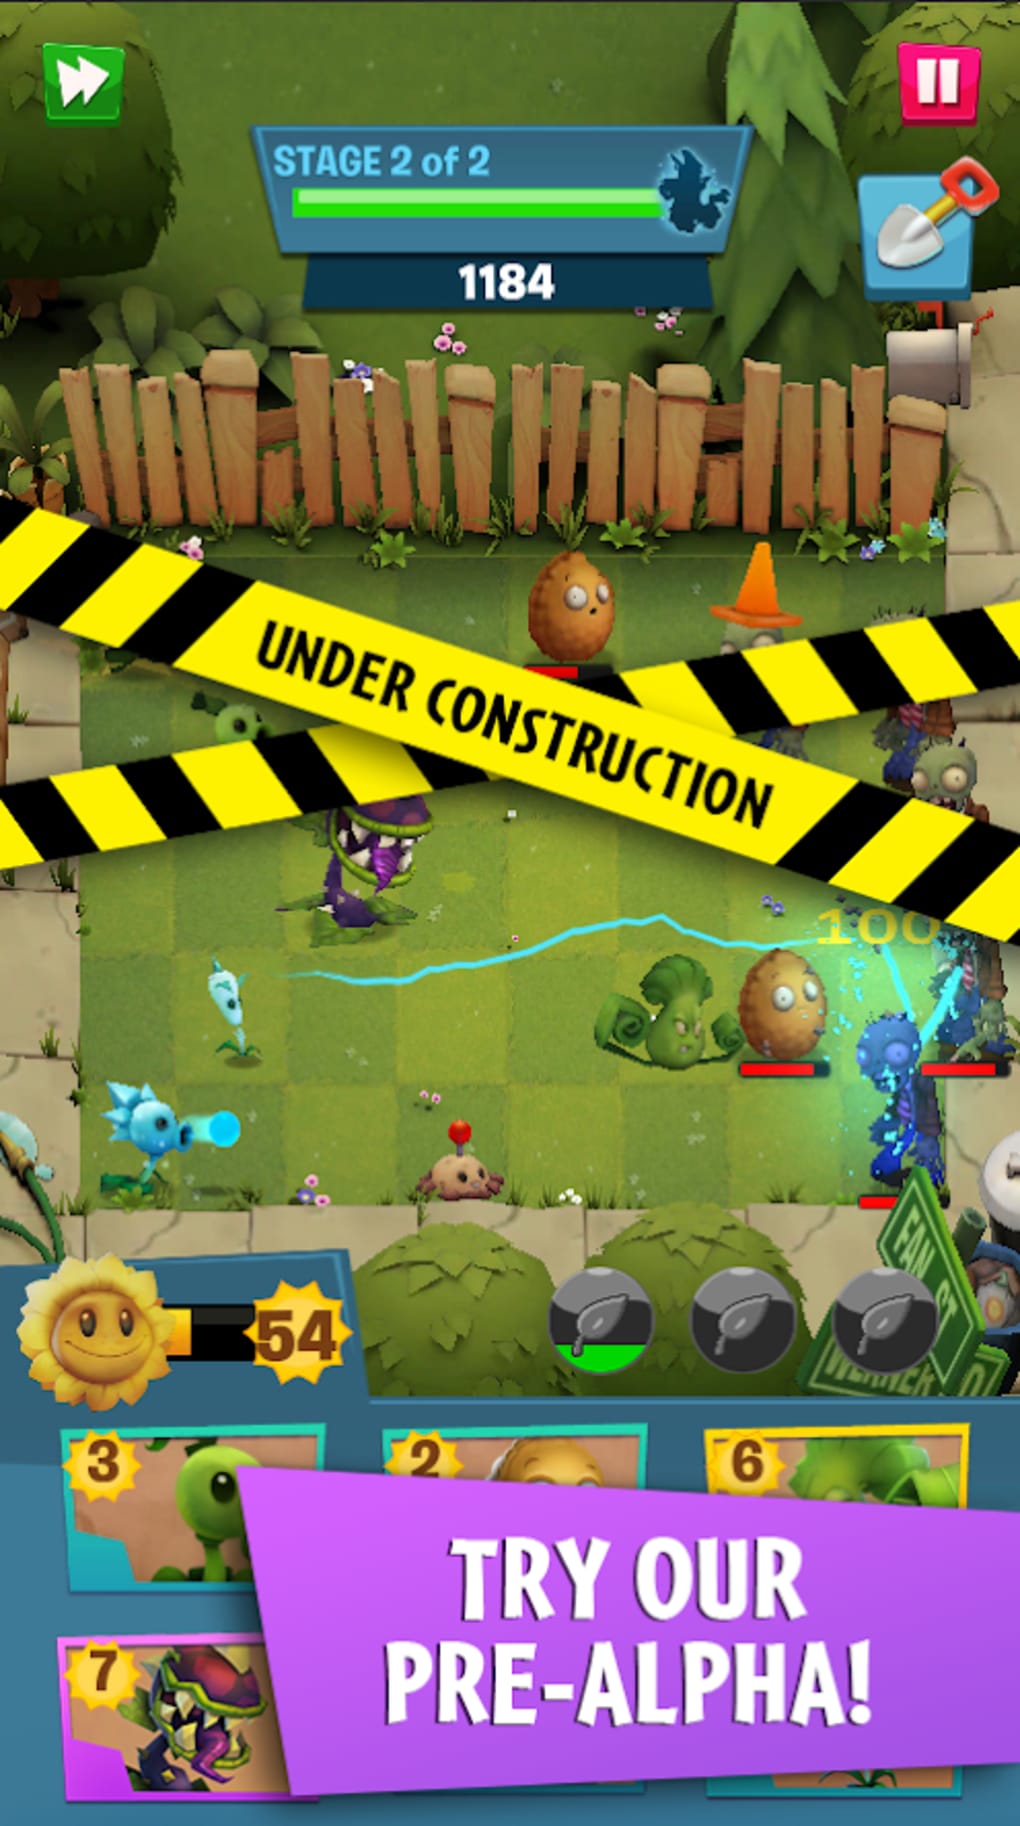 PvZ 3 BETA [Android] - Plants vs. Zombies 3 NEW UPDATE 2023 